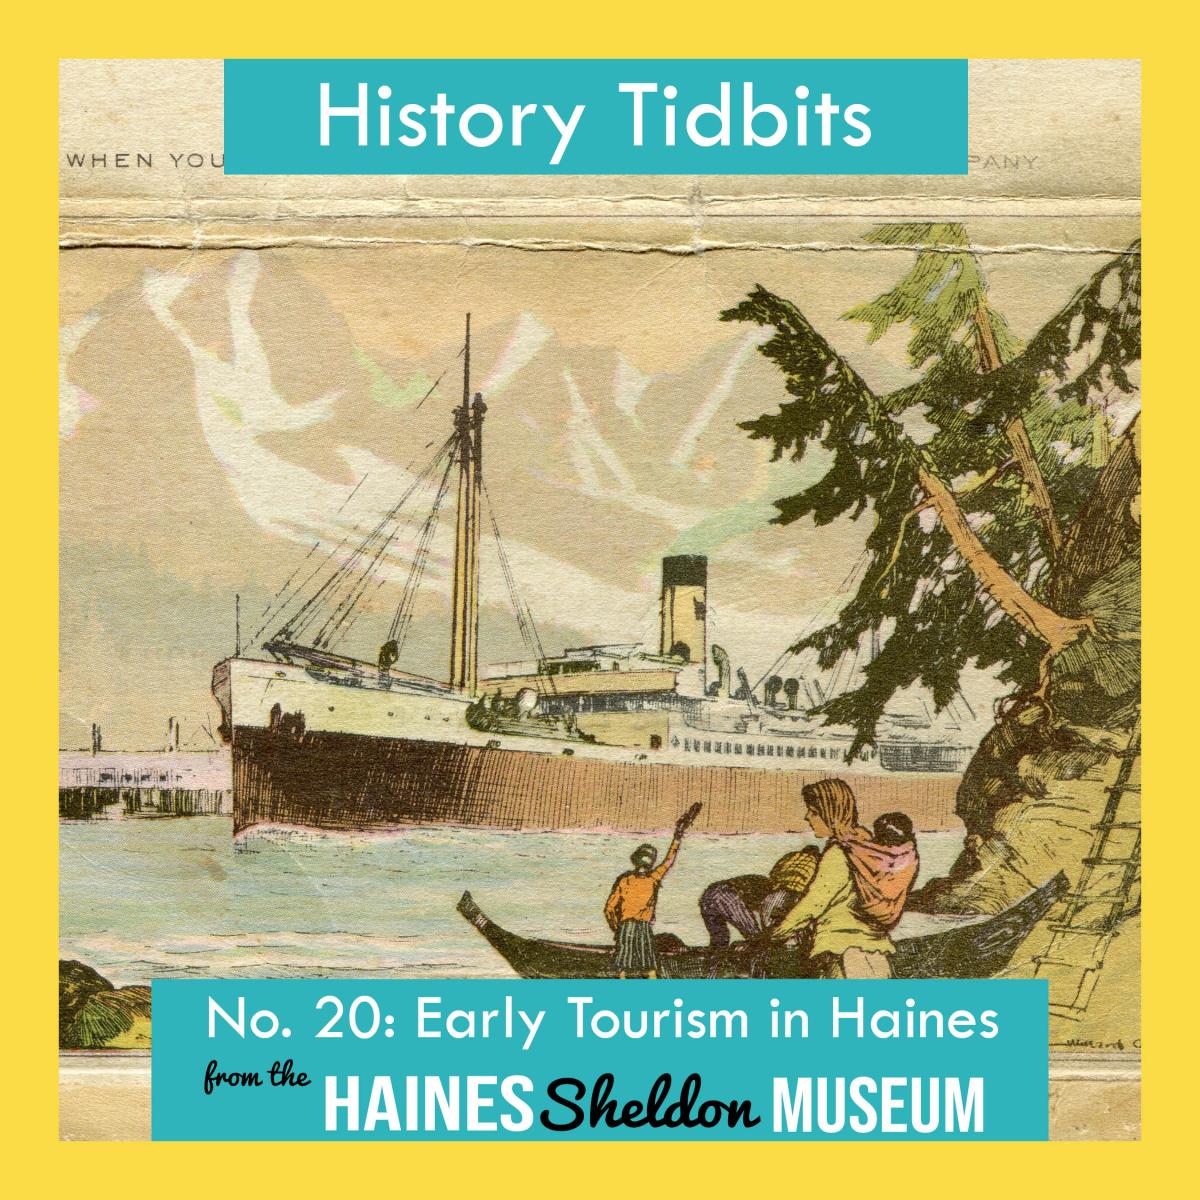 Early Tourism in Haines